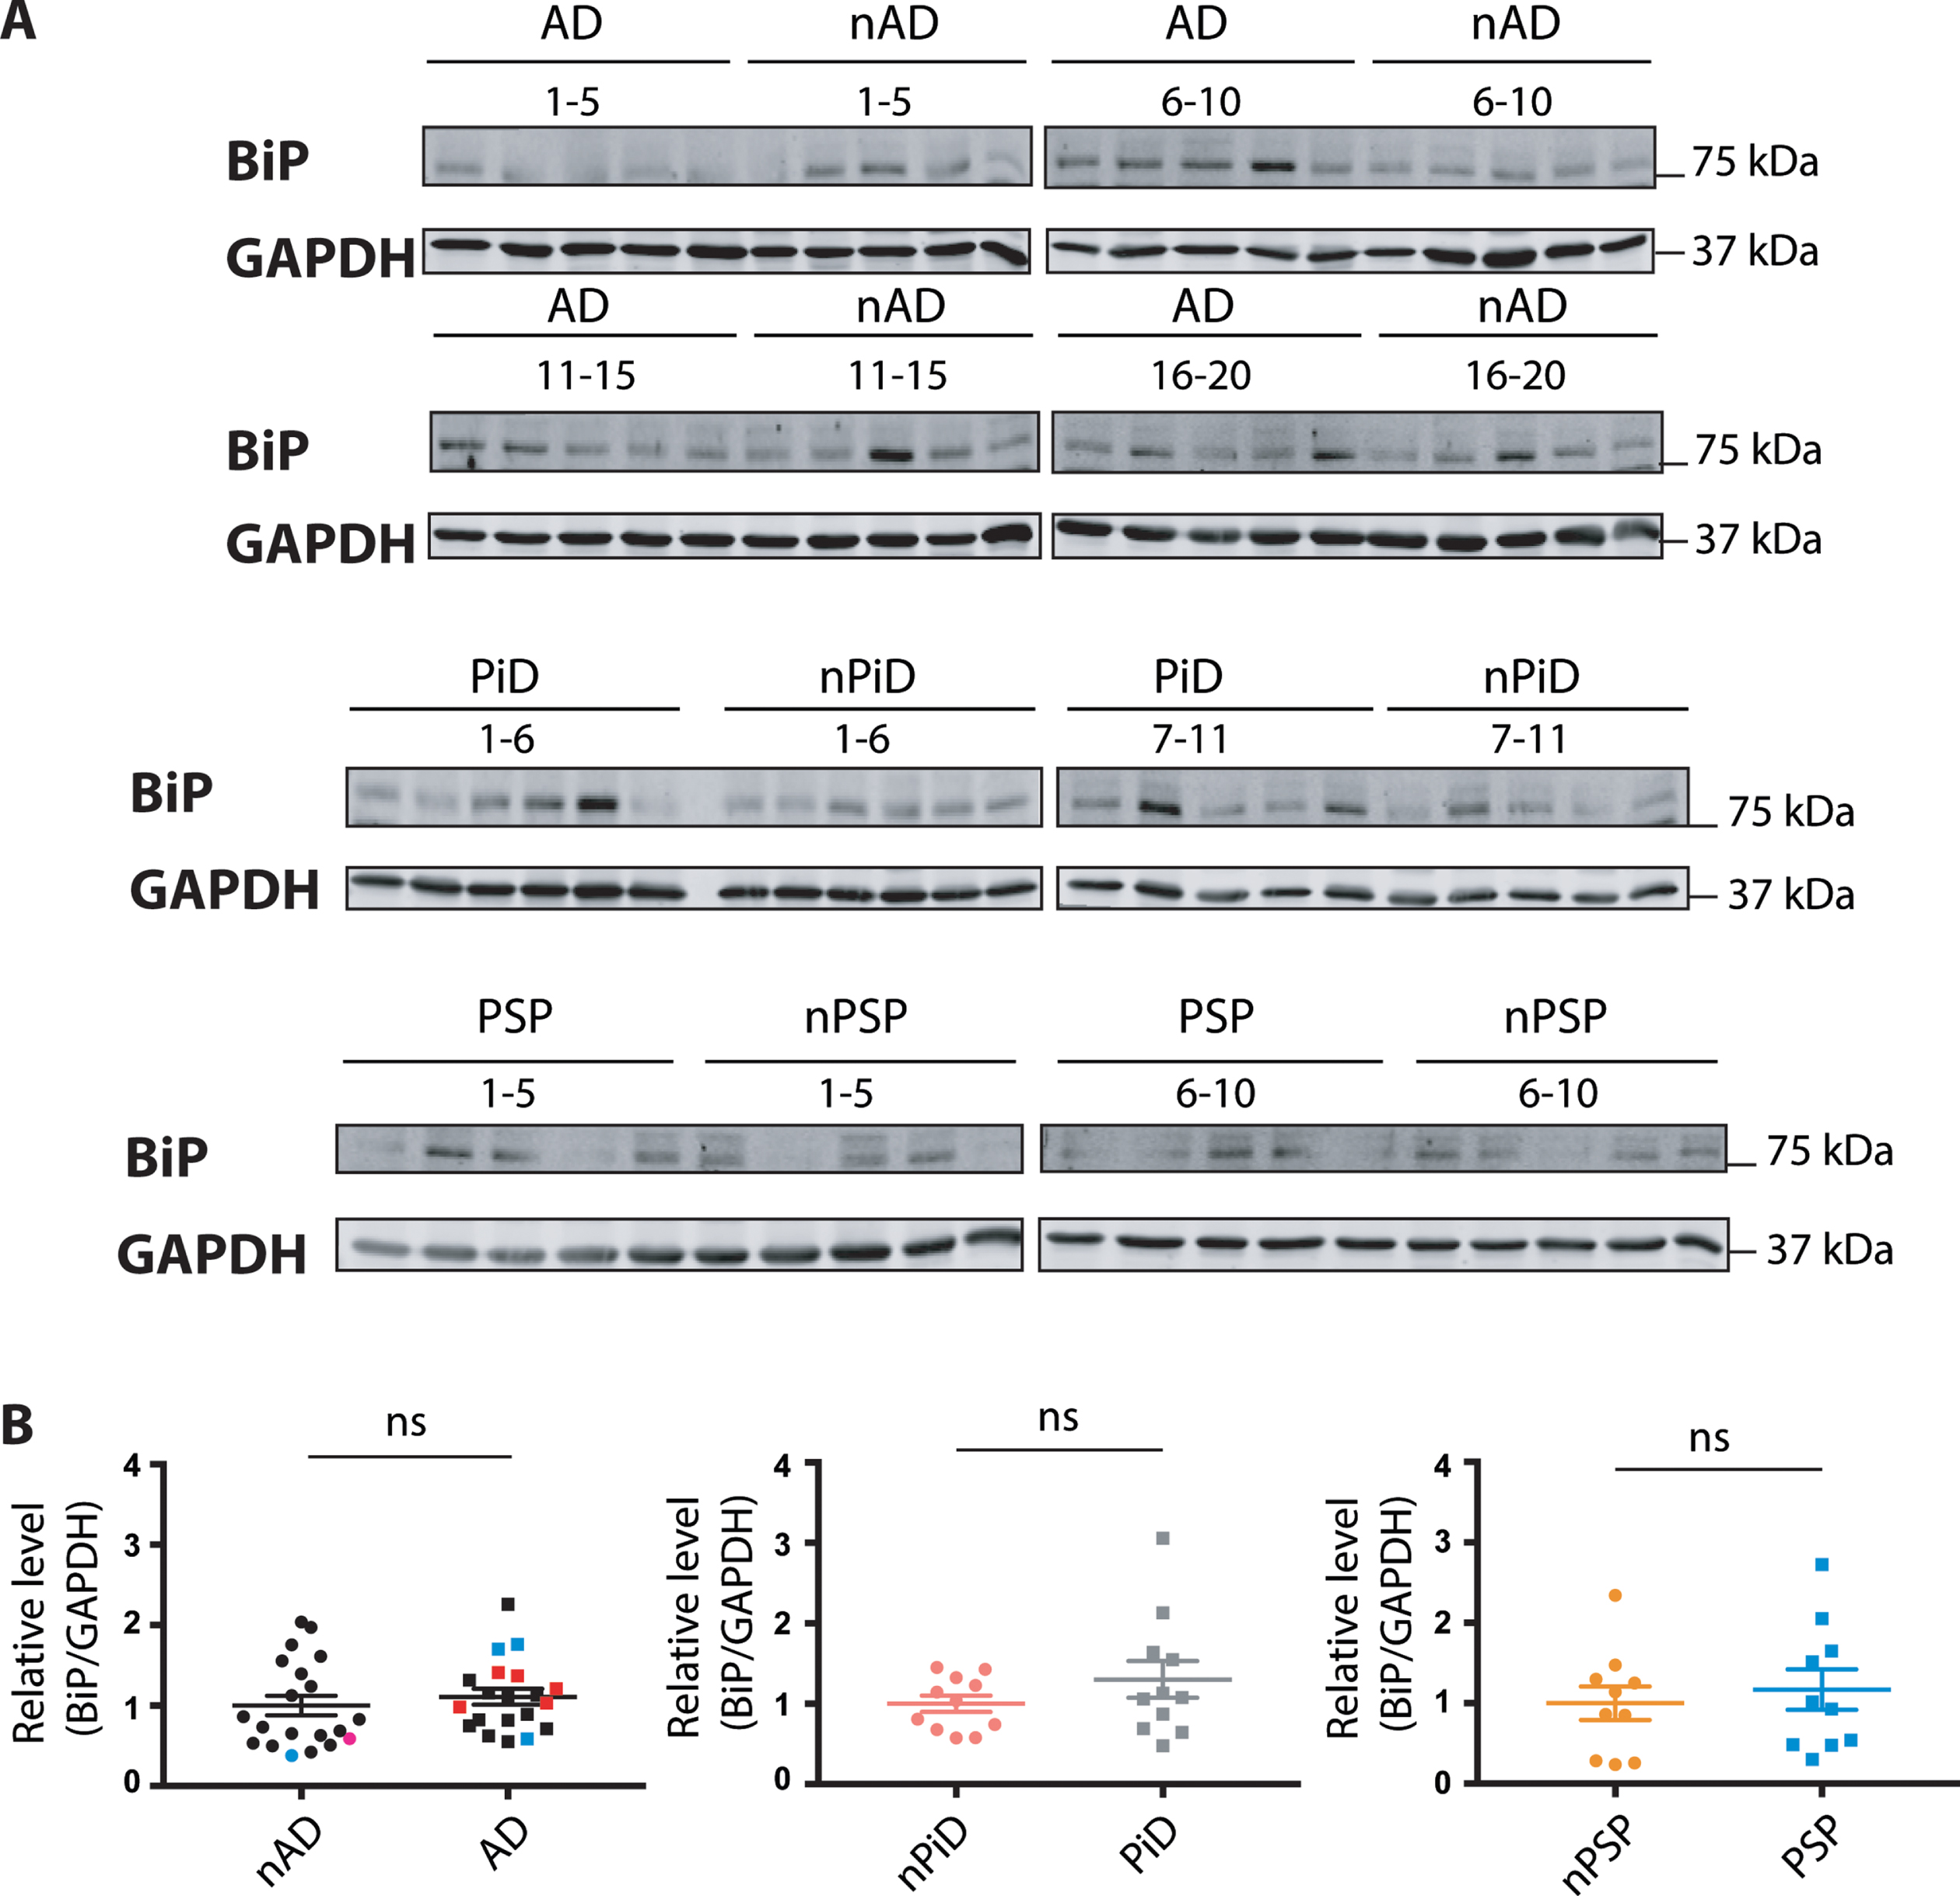 BiP protein expression in tauopathies and age-matched non-demented controls. A) BiP and GAPDH immunoreactivity for AD, PiD, and PSP together with relative age-matched non-demented controls. B) Quantification of BiP immunoreactivity from individual samples was normalized to the immunoreactivity of a loading control, GAPDH. Data were analyzed using a Mann-Whitney test (AD, PiD) or two-tailed unpaired t-test (PSP) revealing no significant differences (p = 0.2888 and U = 160, p = 0.4779 and U = 49, p = 0.6099 and t = 0.5193 for AD, PiD disease and PSP, respectively). Shown are means, error bars are SEM. ns, not significant. Number of cases: ND = 20, AD = 20, nPiD = 11, PiD = 11, nPSP = 10, PSP = 10. Each lane corresponds to one individual case. Colored symbols for nAD, AD cases correspond to individuals with LBD co-morbidity (red), APOE 4.4 genotype (blue), and CVD co-morbidity (magenta).